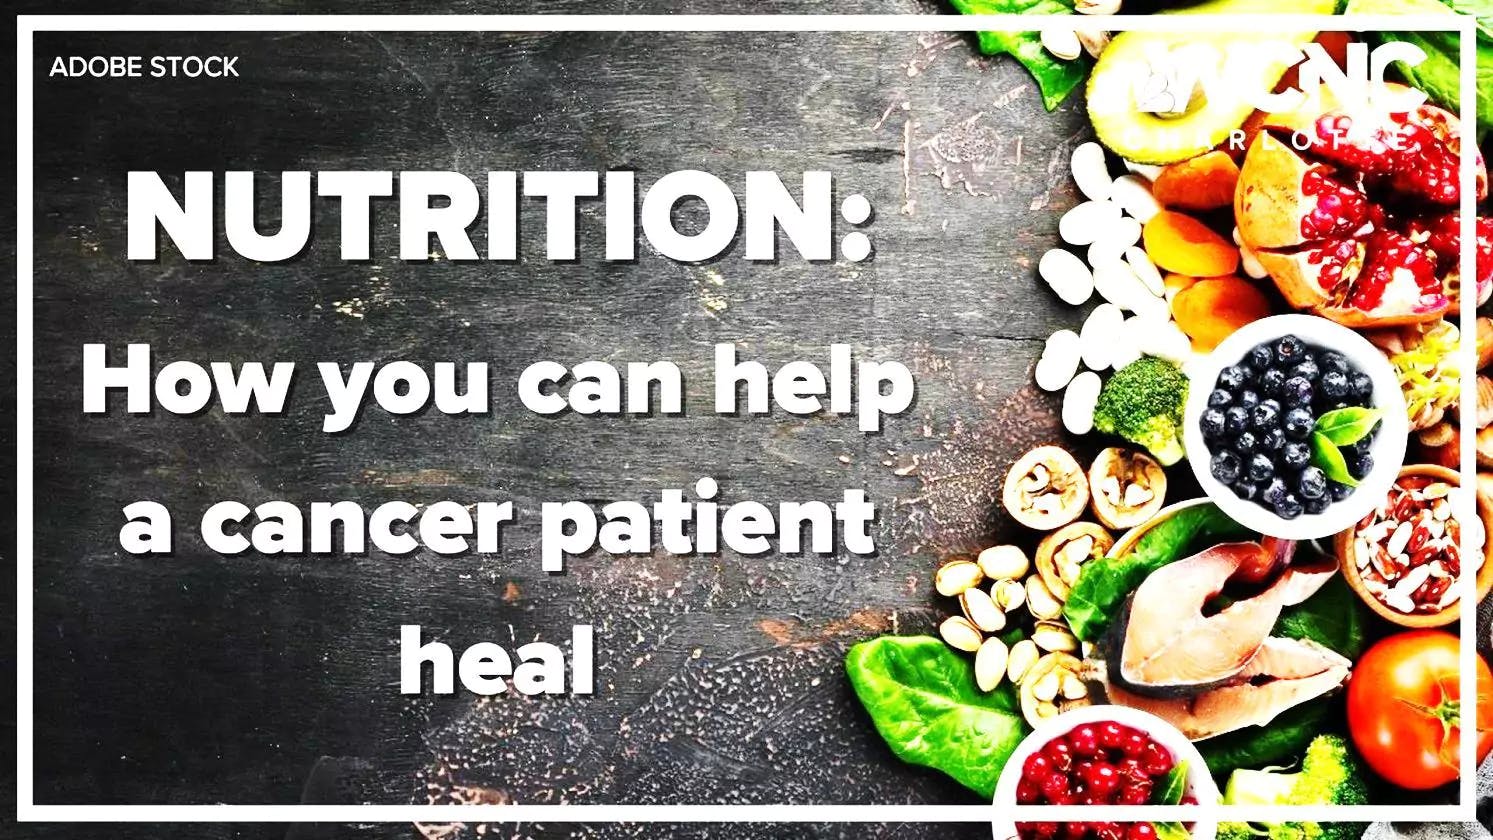 'Food for the Fight' is an approach that focuses on incorporating a healthy and balanced diet to support cancer treatment and recovery. This blog provides nutritional advice for cancer patients, including tips on whole foods, hydration, protein, food safety, and physical activity. Working with a registered dietitian is recommended for personalized advice.